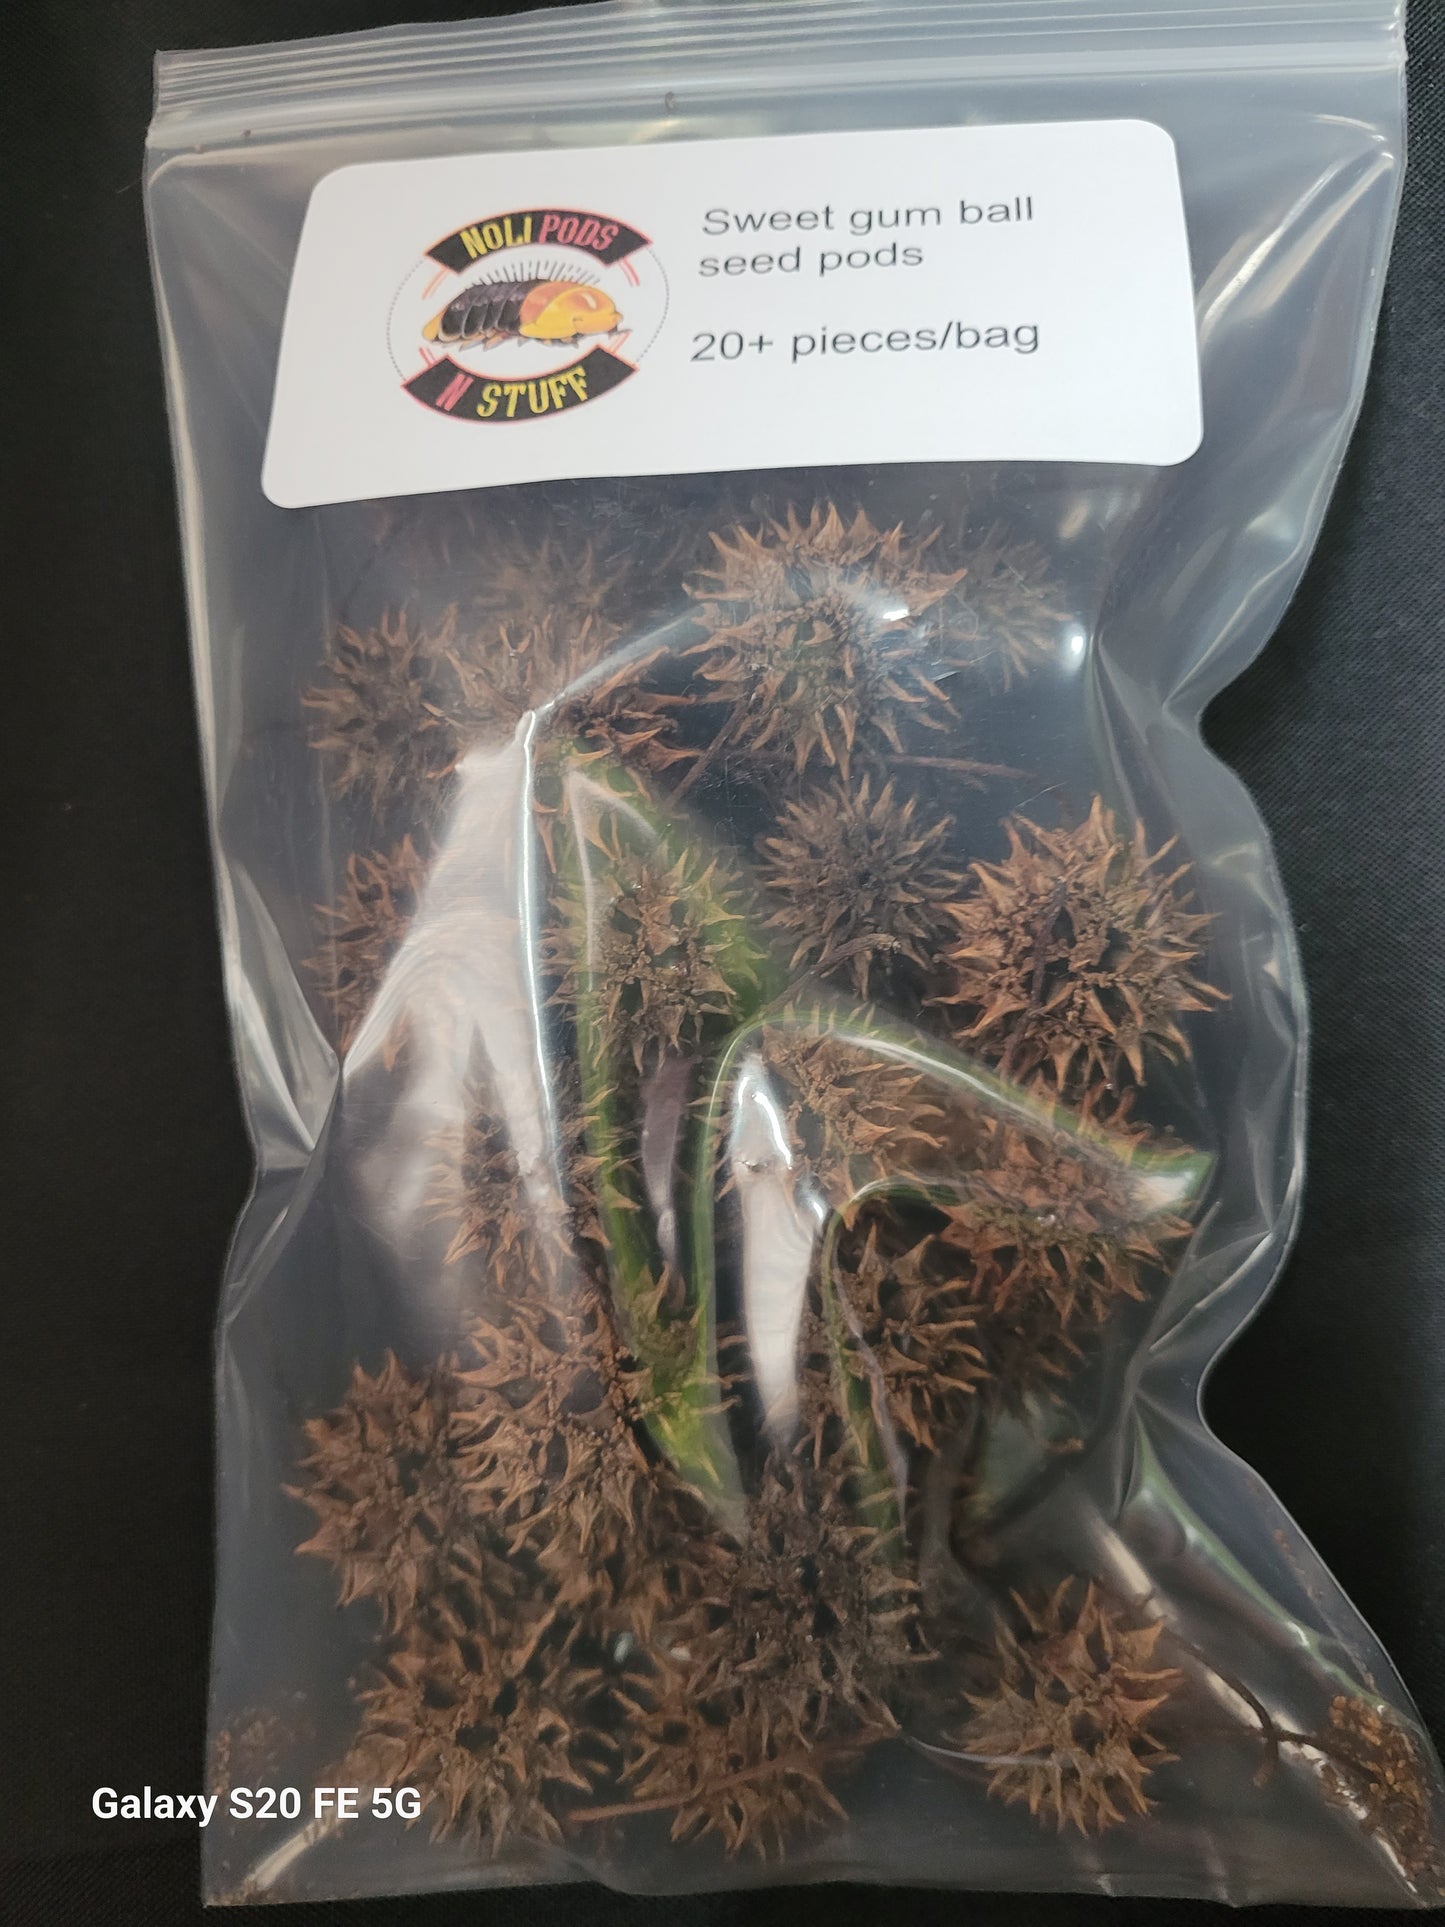 (2) 20+ packs of sweet gum ball seed pods